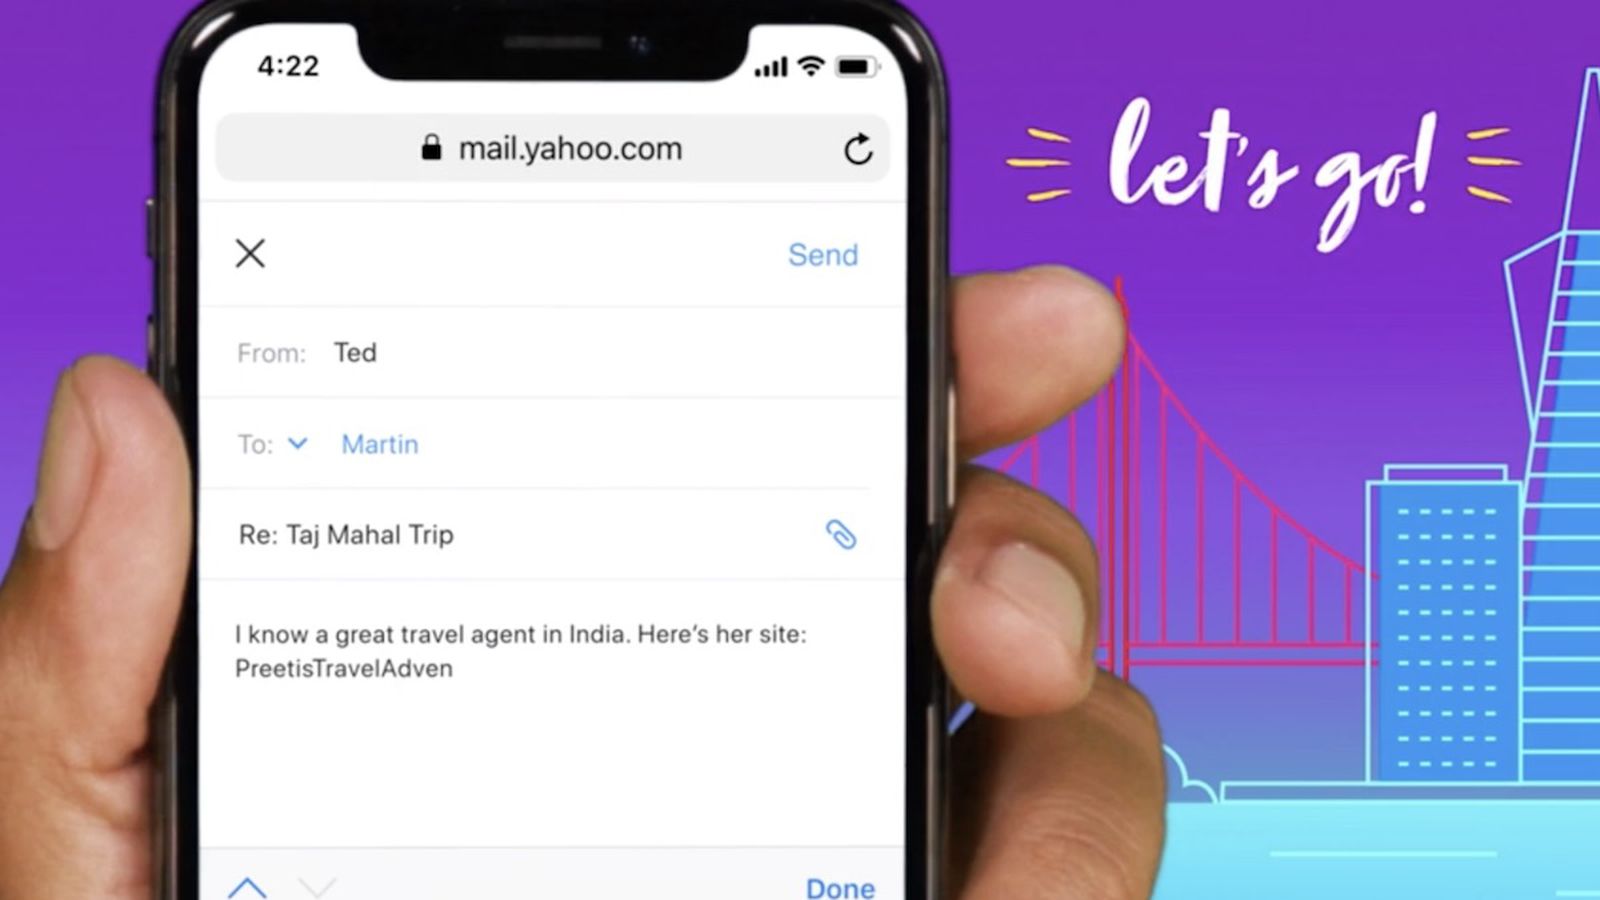 yahoo-mail-launches-new-mobile-web-experience-android-go-app